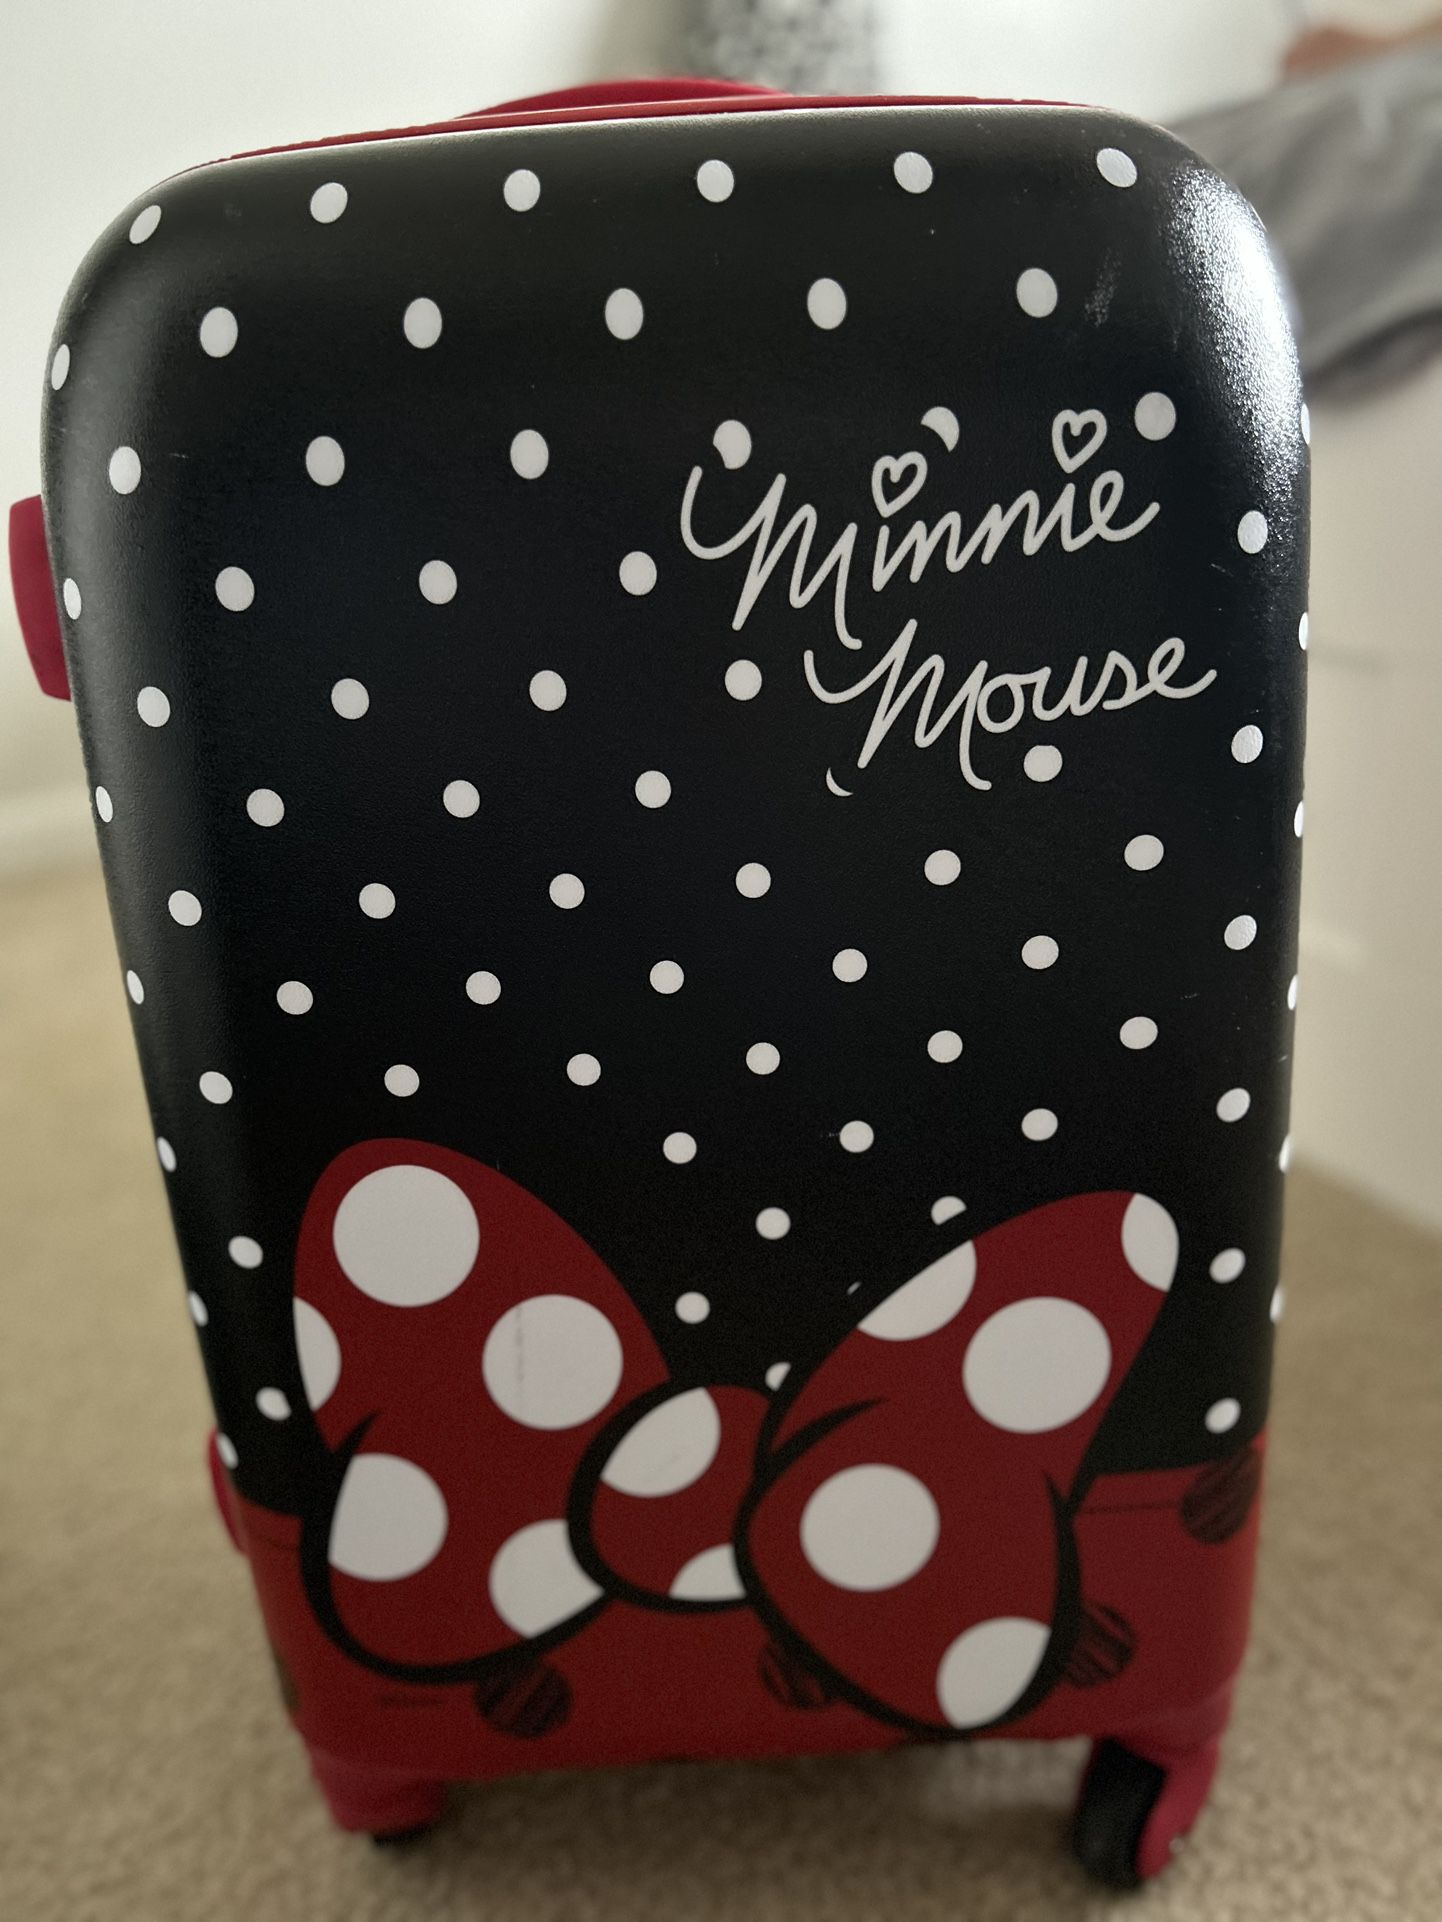 Small -American Tourister  Minnie Mouse Luggage - Price Reduced!!!